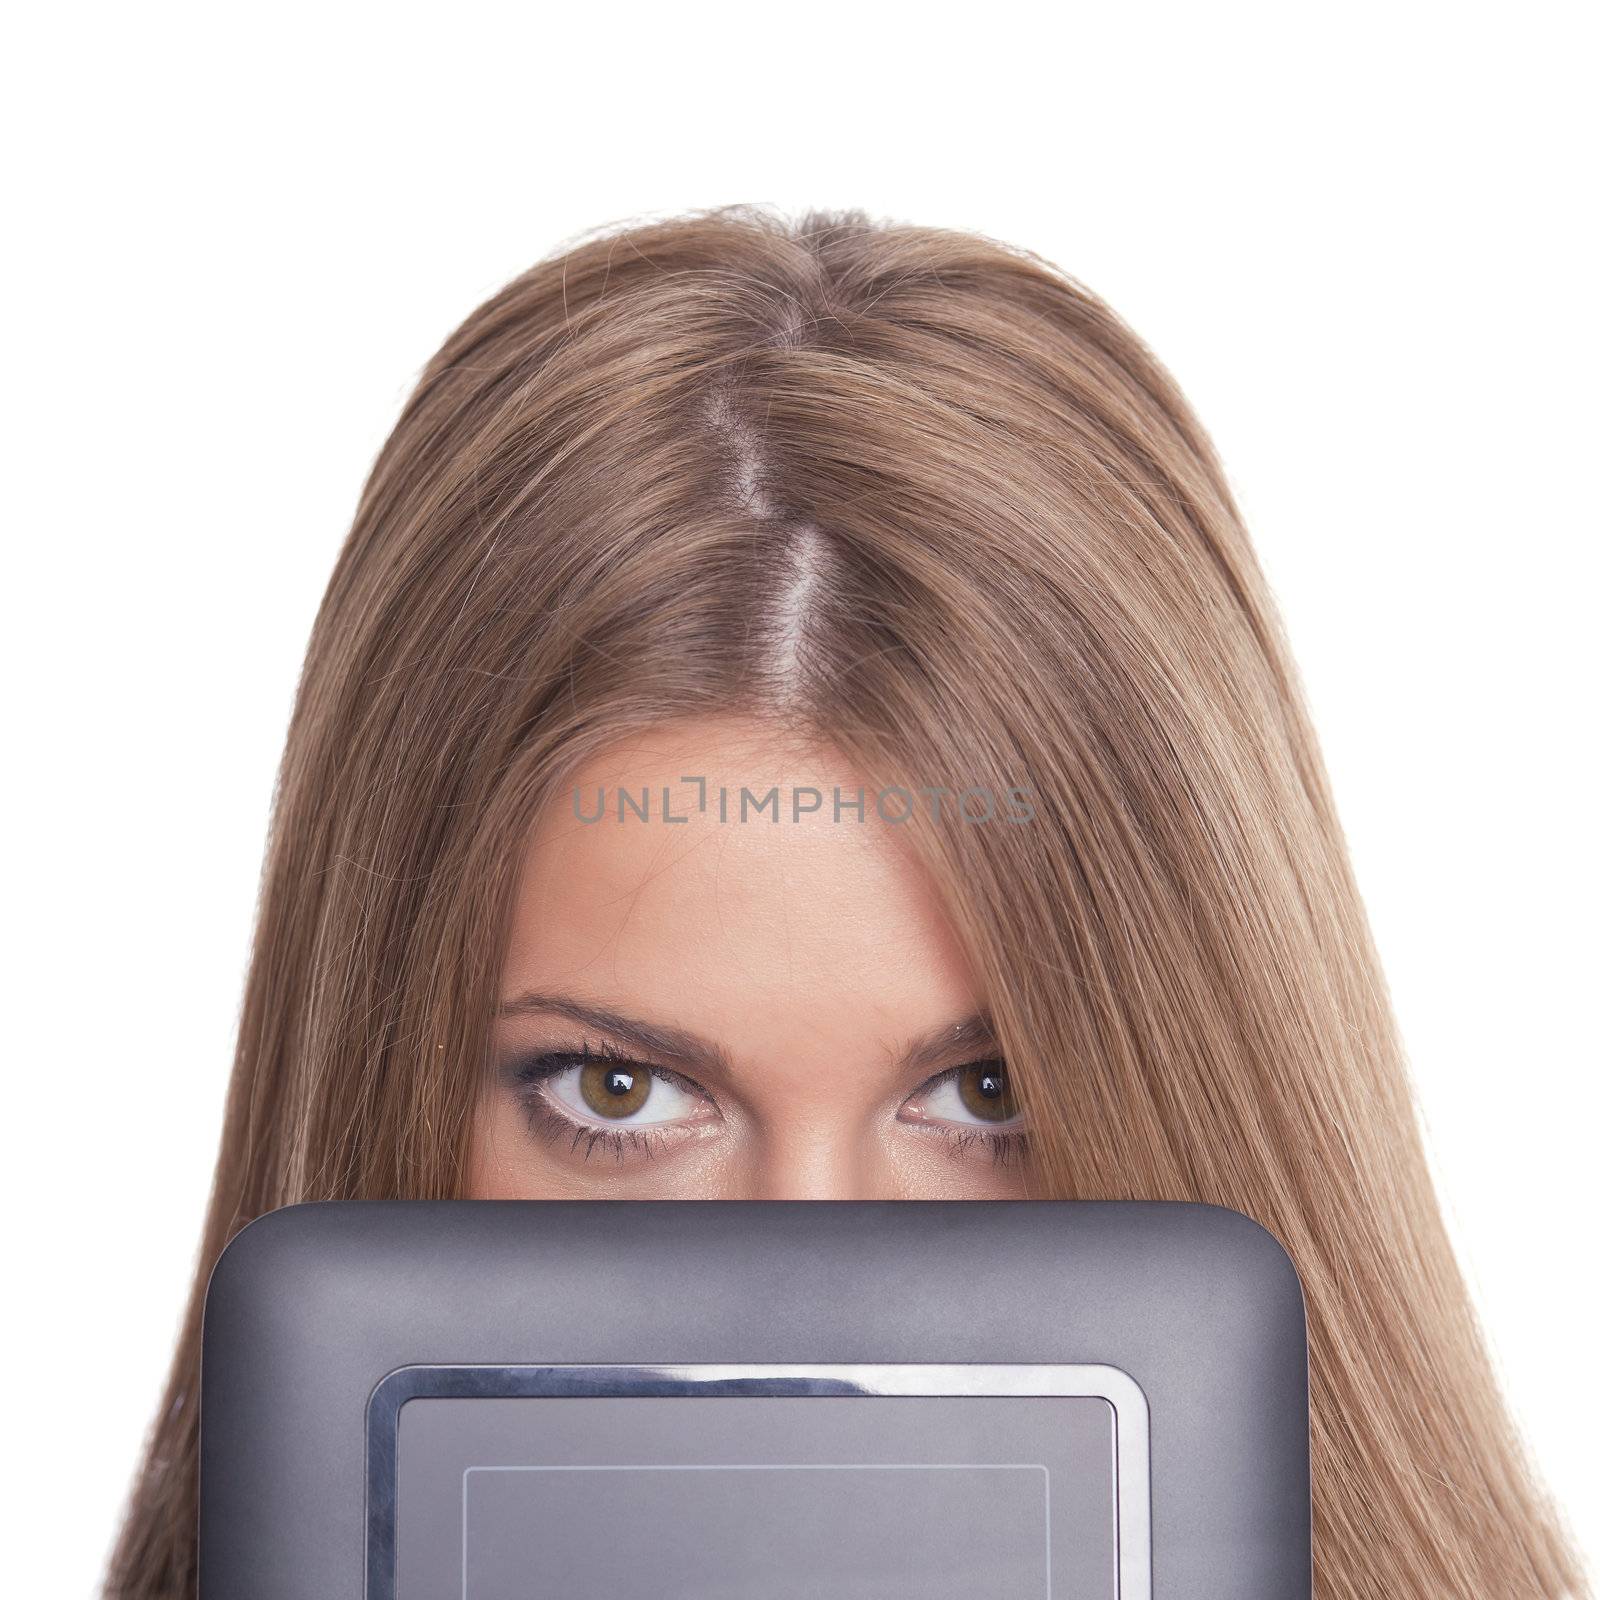 Beautiful Woman Hiding Face With Tablet Computer by adamr